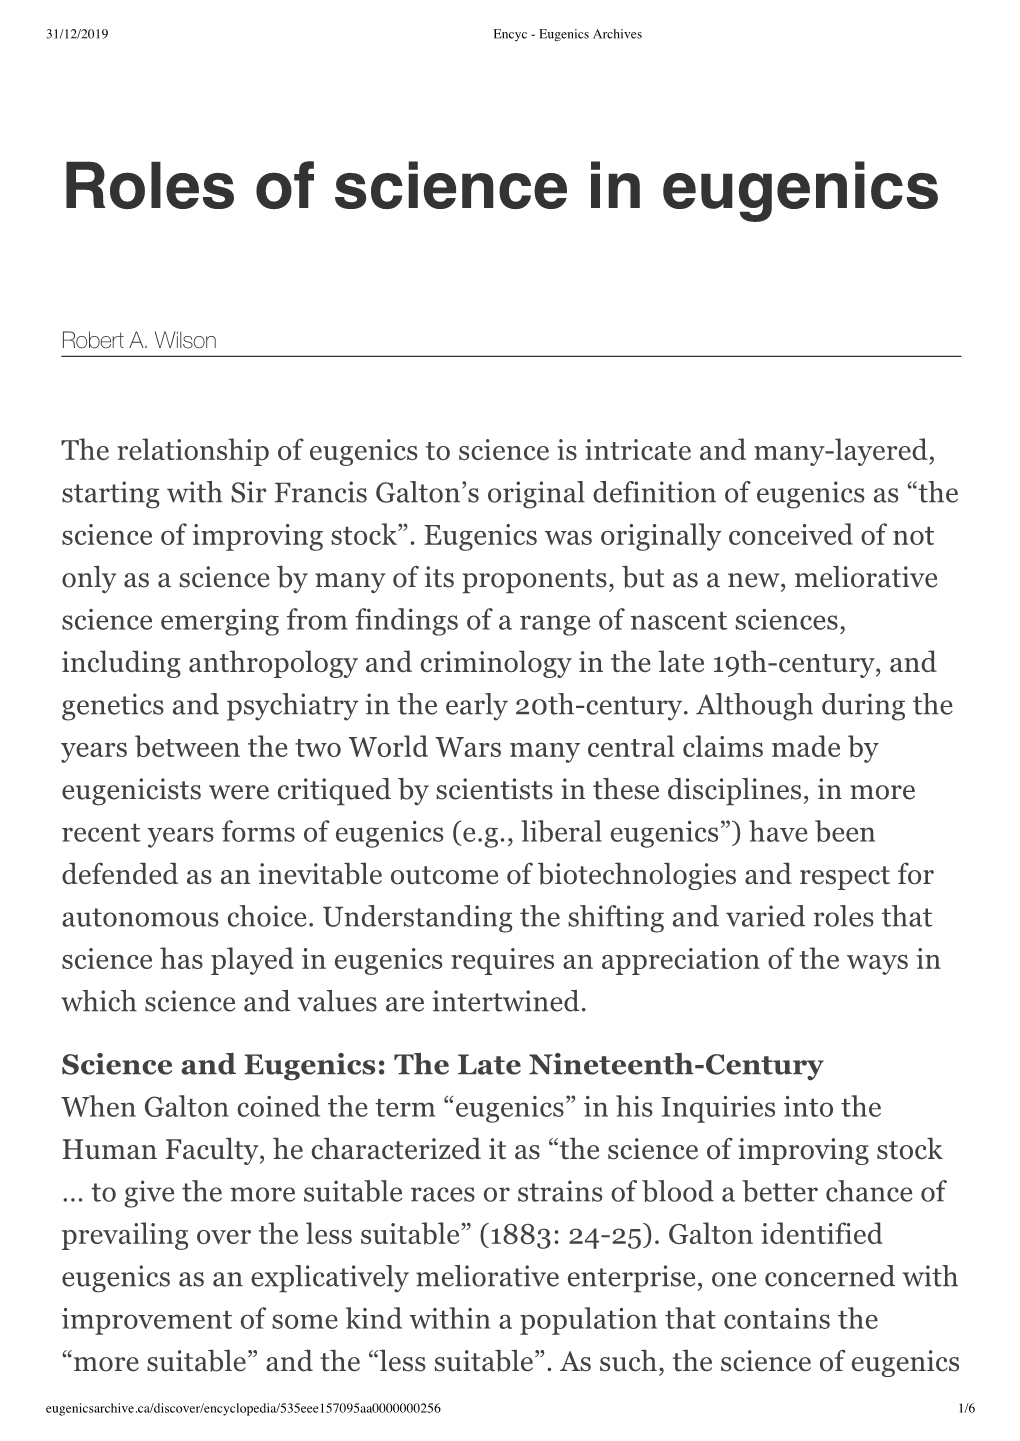 Roles of Science in Eugenics